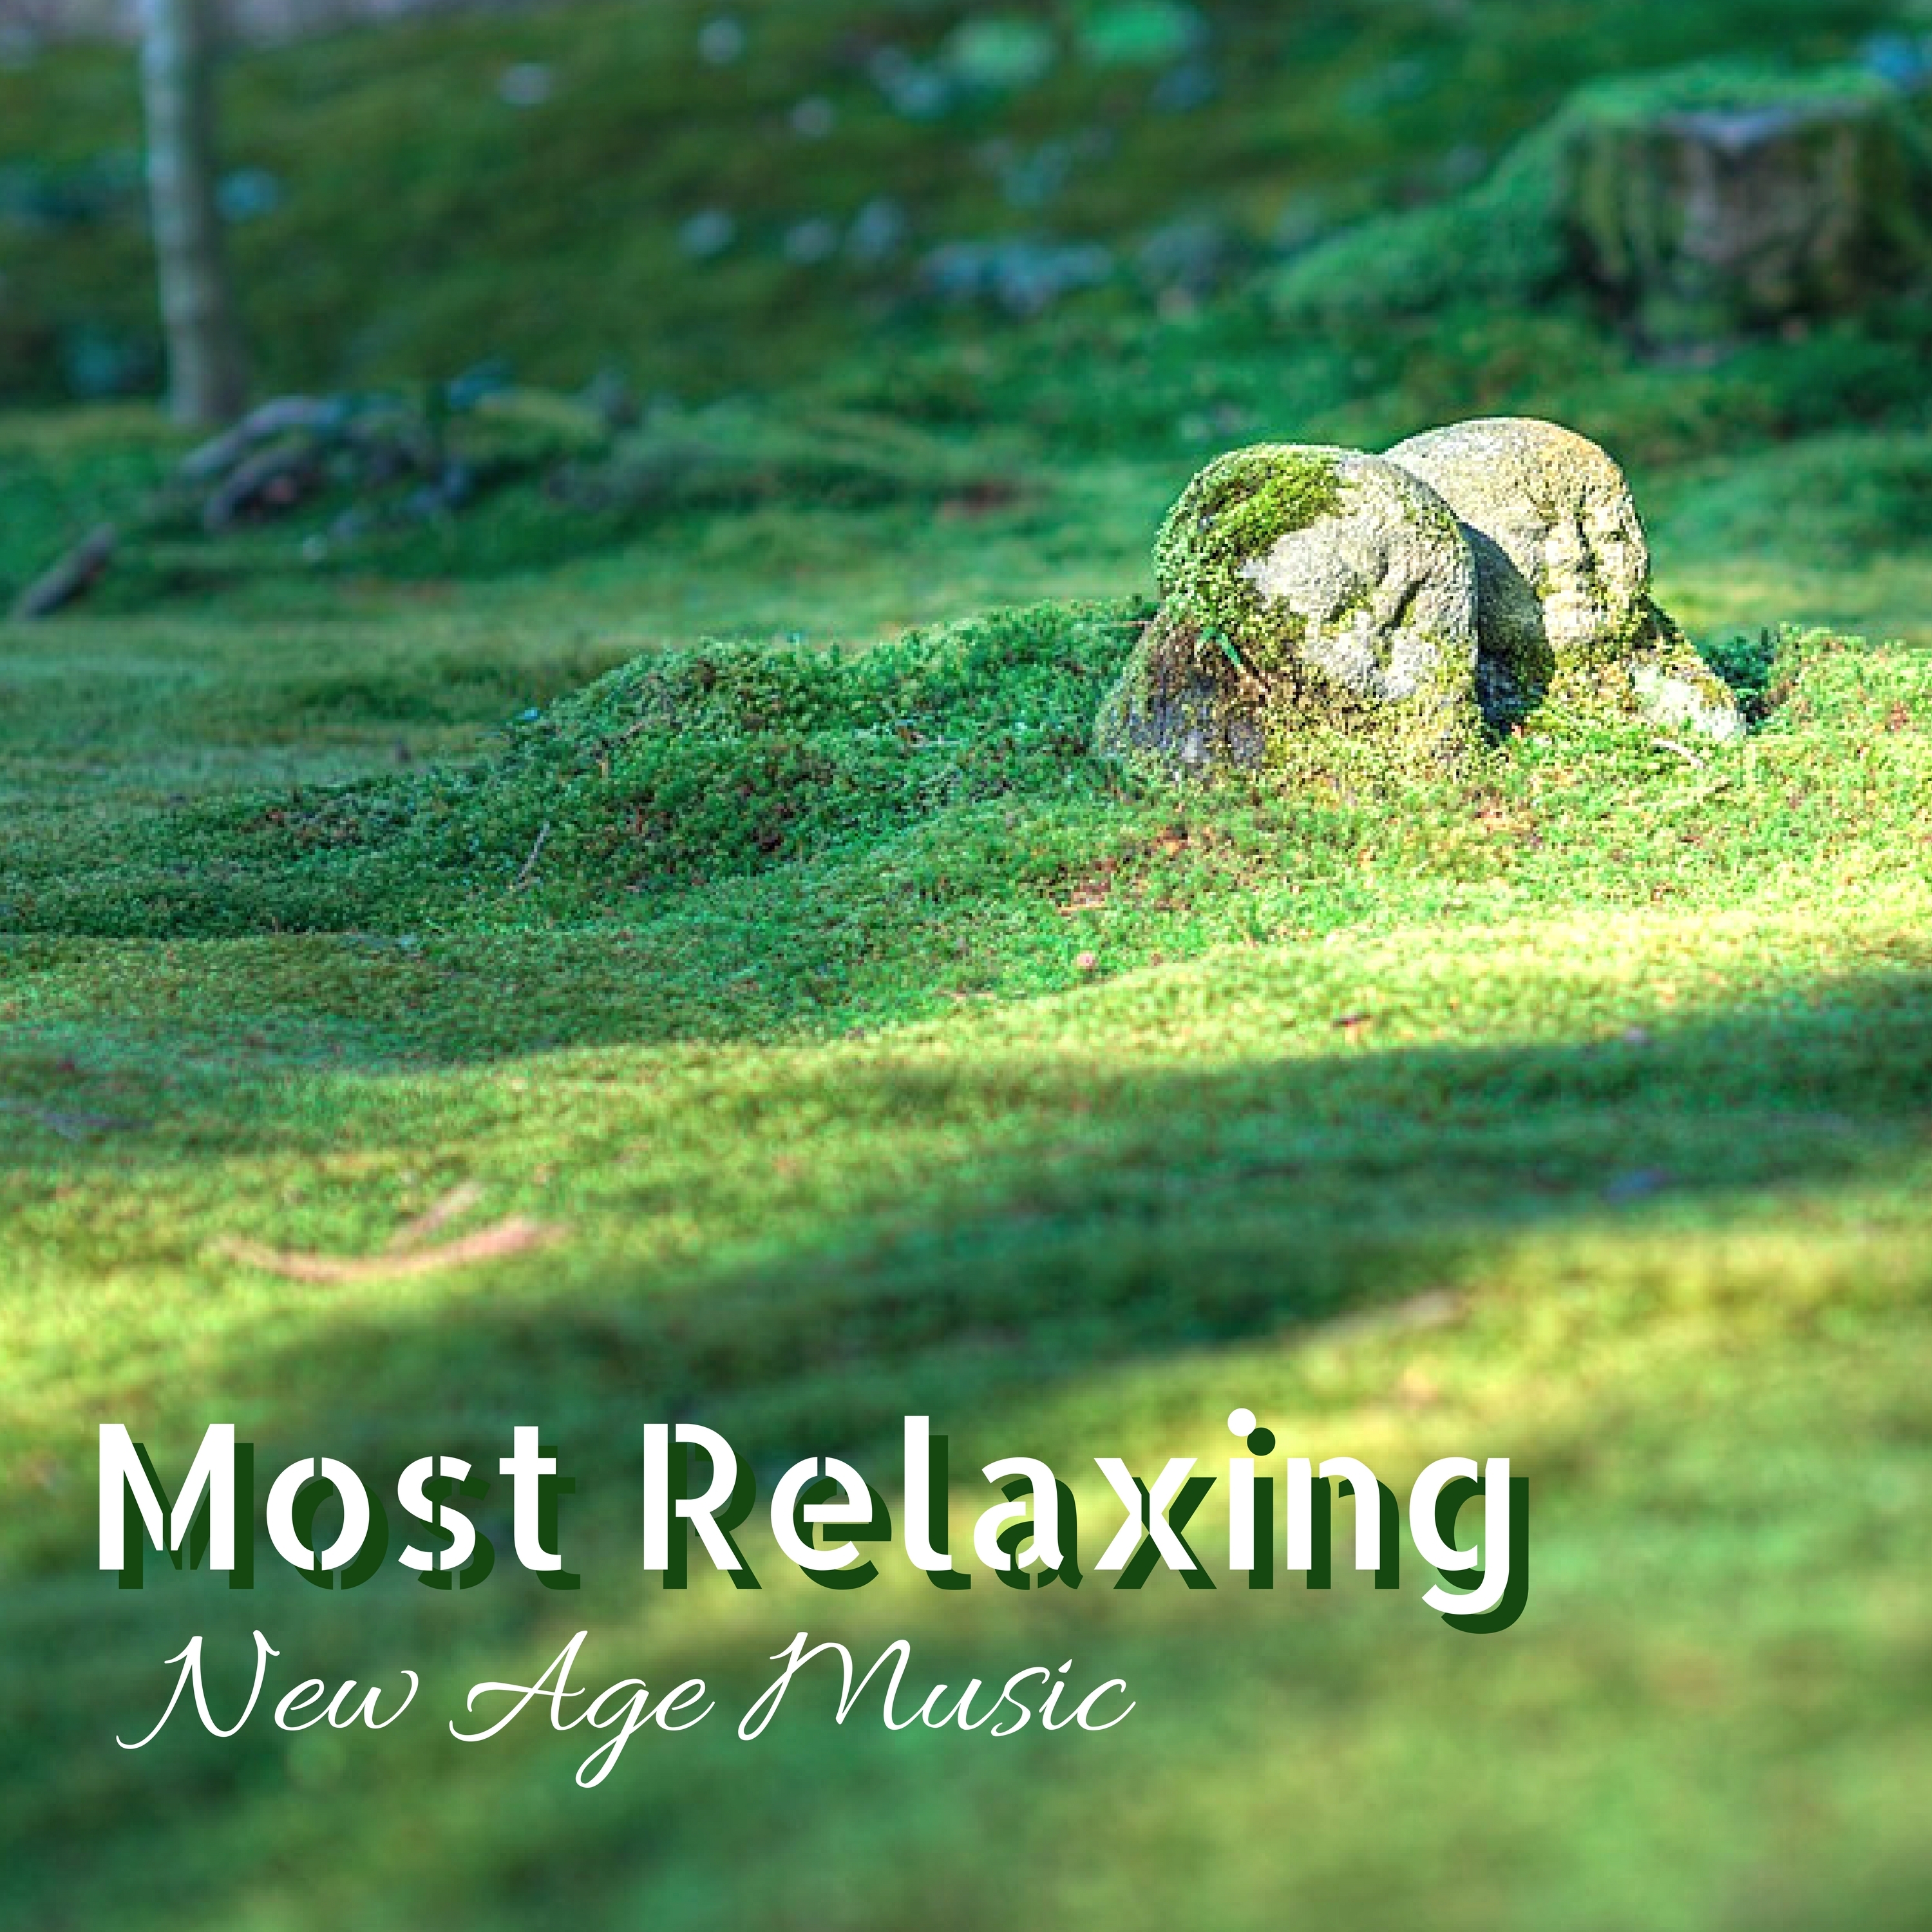 Most Relaxing New Age Music - 25 Tracks for Zen Meditation Experience